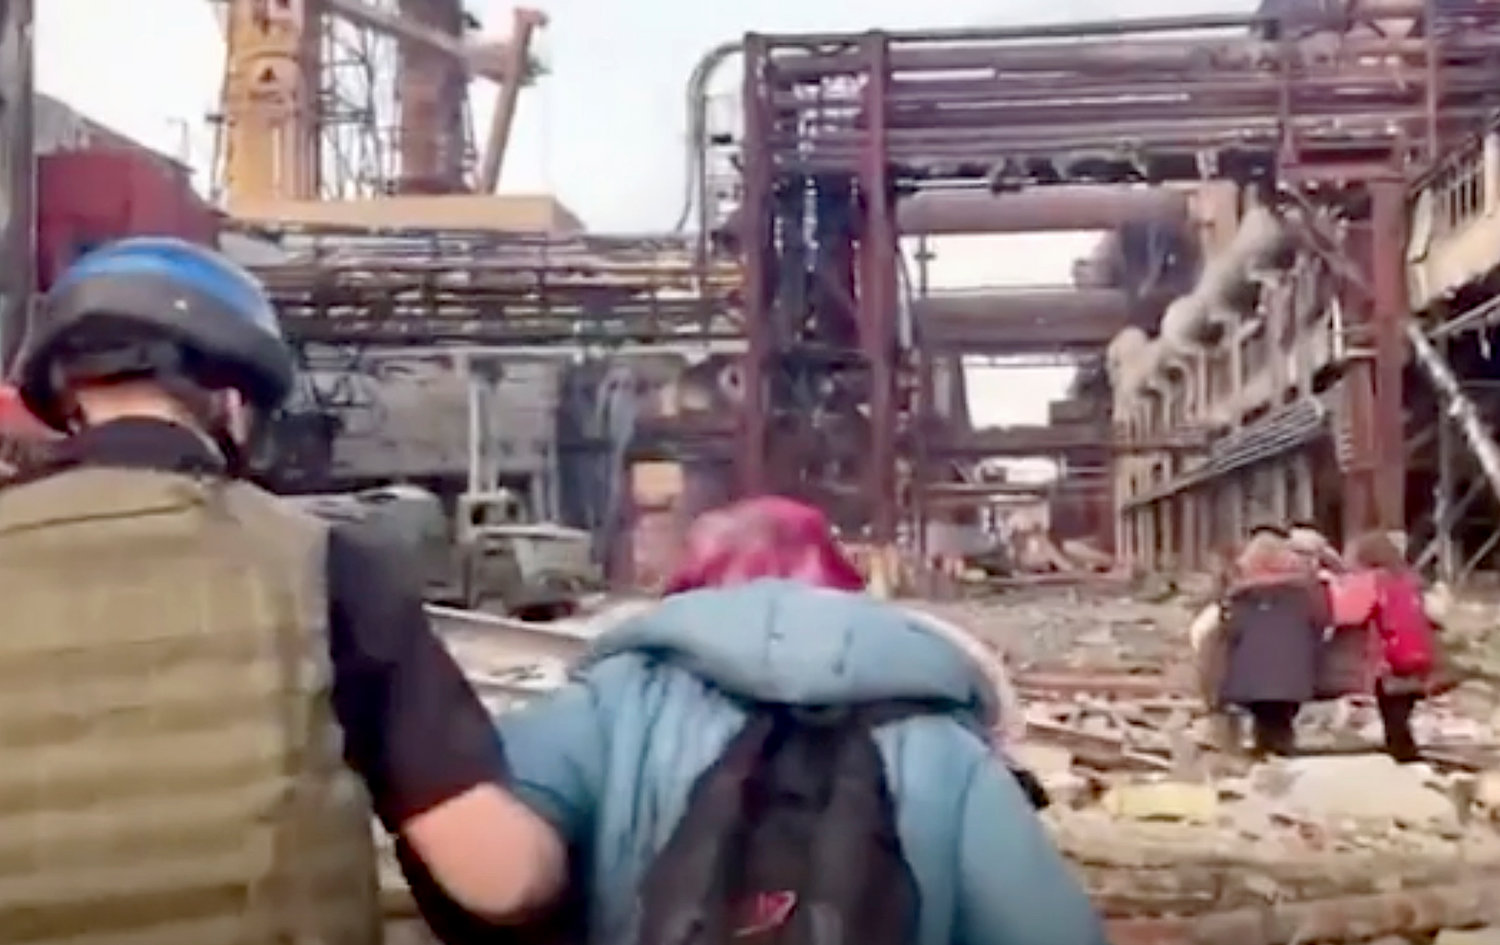 This frame taken from an undated video provided Sunday, May 1, 2022 by the Azov Special Forces Regiment of the Ukrainian National Guard shows people walking over debris at the Azovstal steel plant, in Mariupol, eastern Ukraine. (Azov Special Forces Regiment of the Ukrainian National Guard via AP)